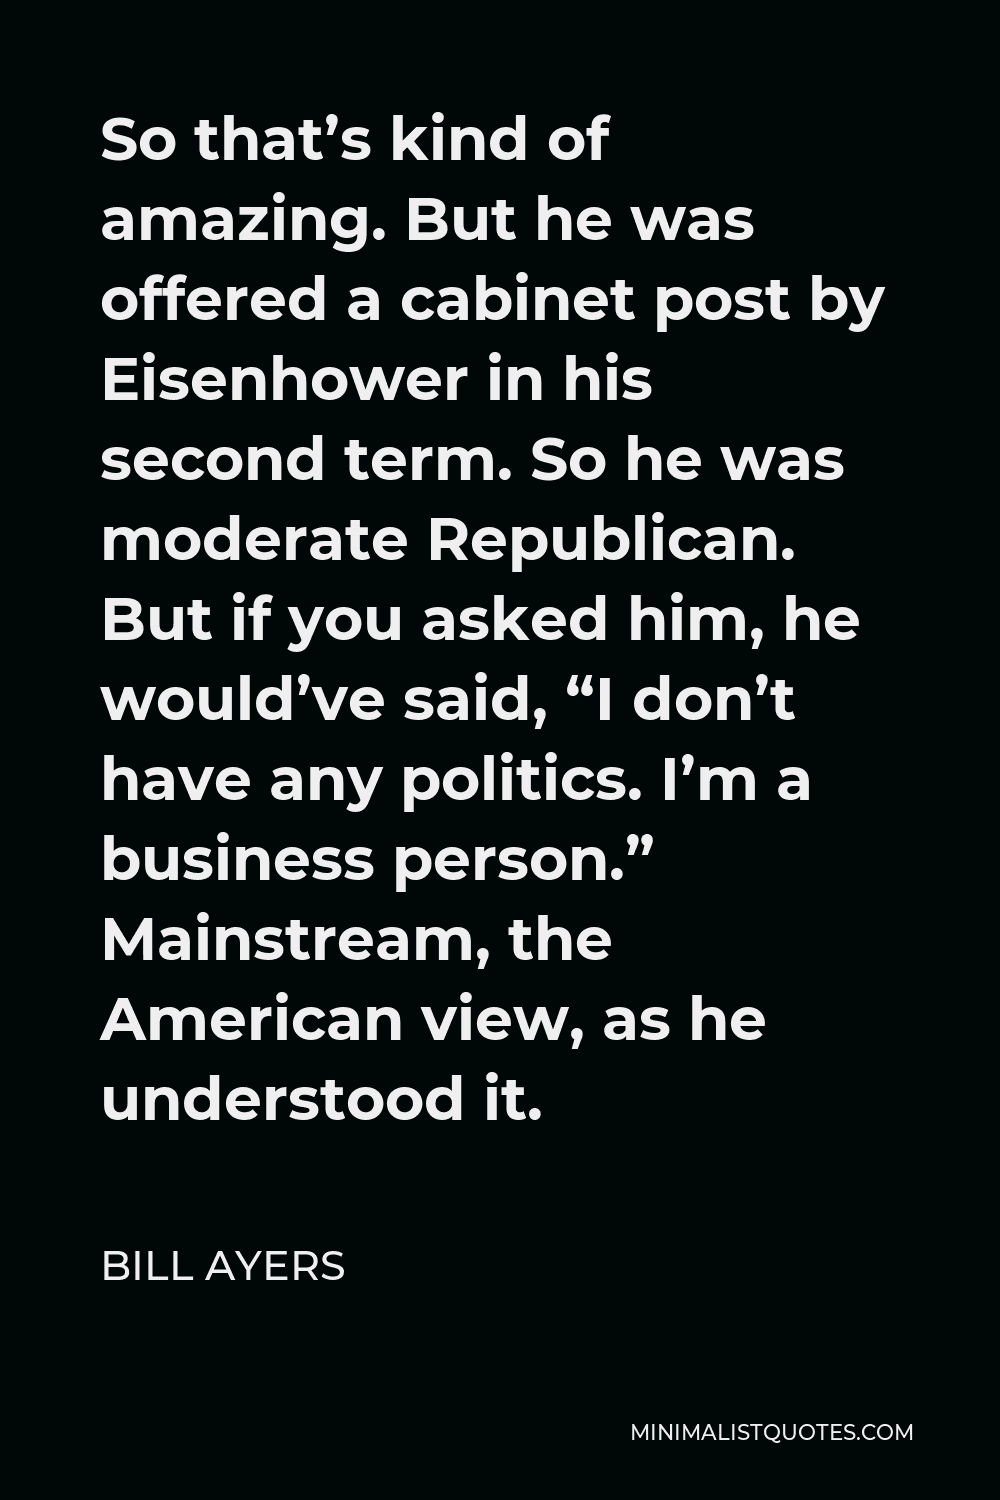 Bill Ayers Quote - So that’s kind of amazing. But he was offered a cabinet post by Eisenhower in his second term. So he was moderate Republican. But if you asked him, he would’ve said, “I don’t have any politics. I’m a business person.” Mainstream, the American view, as he understood it.